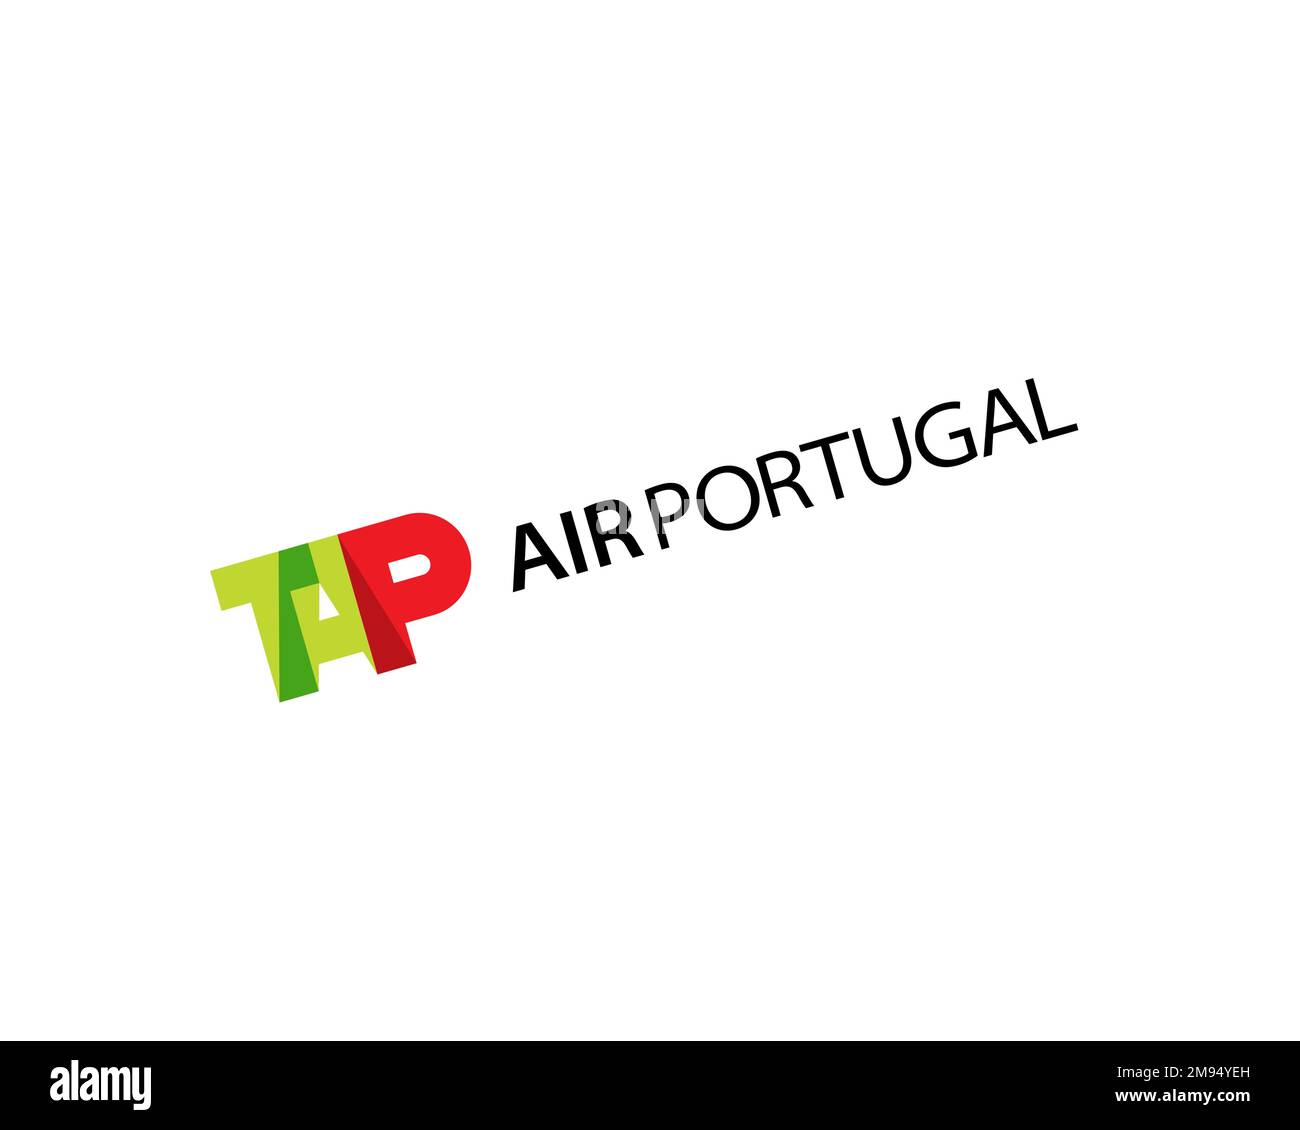 Tap portugal Cut Out Stock Images & Pictures - Alamy